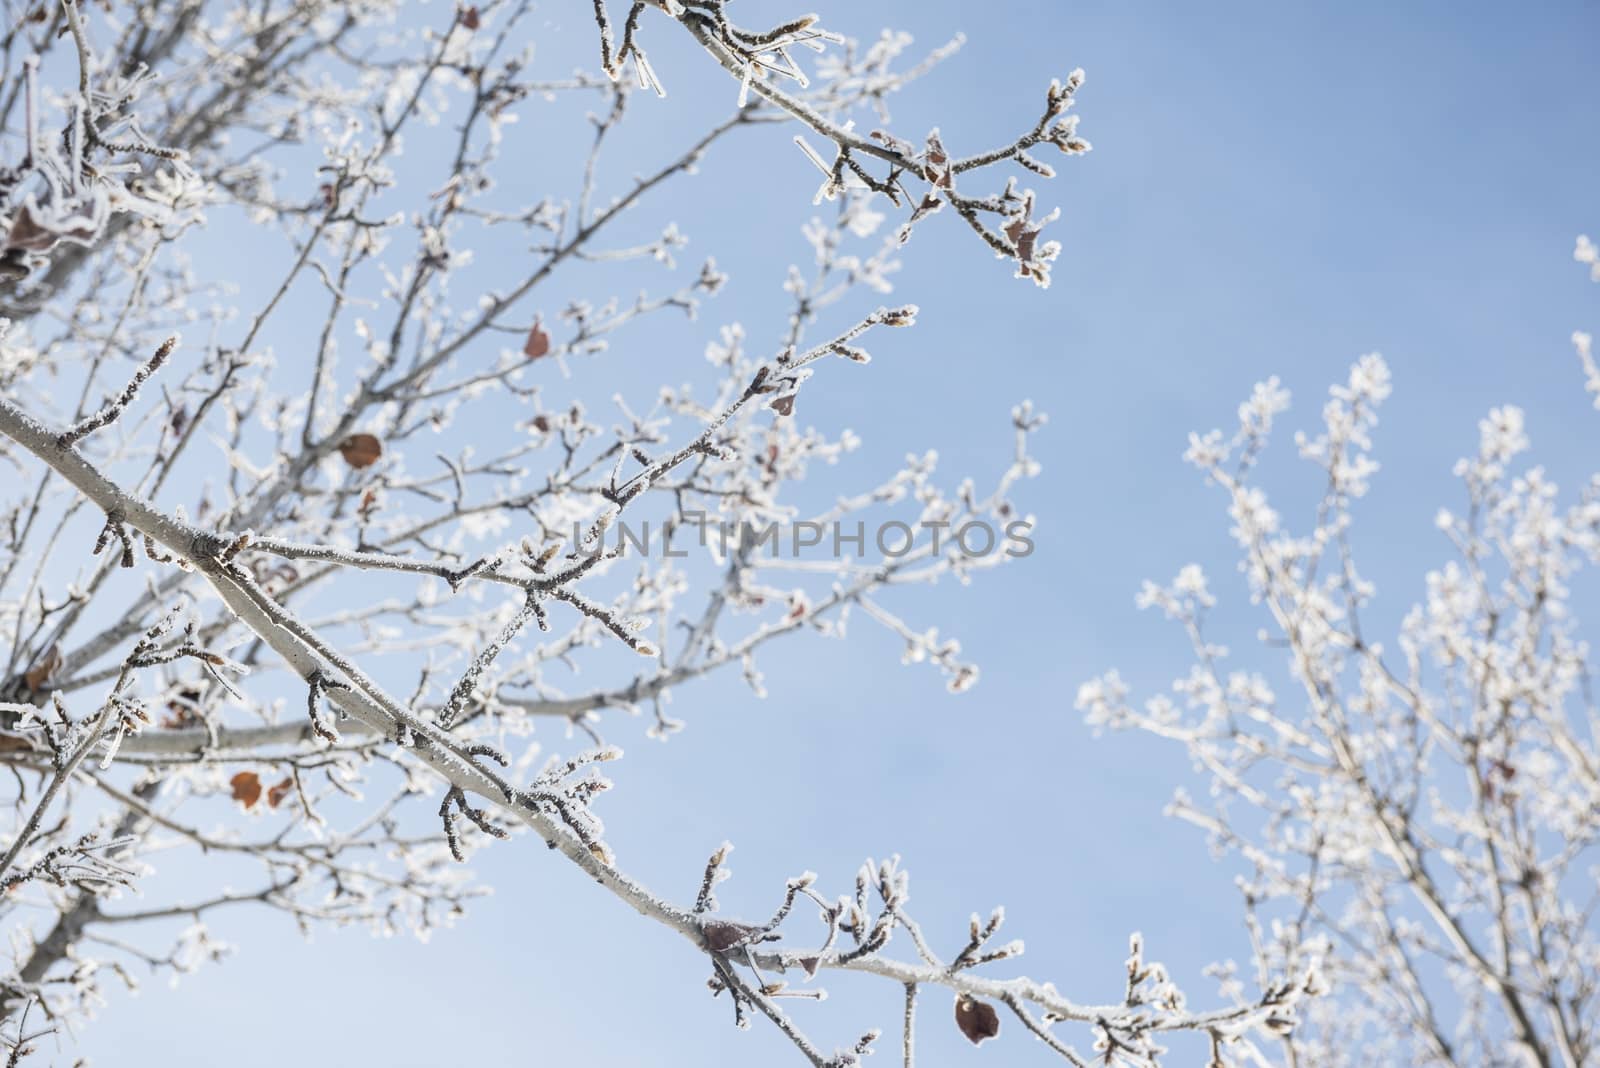 Frost-covered tree branches in winter by Njean